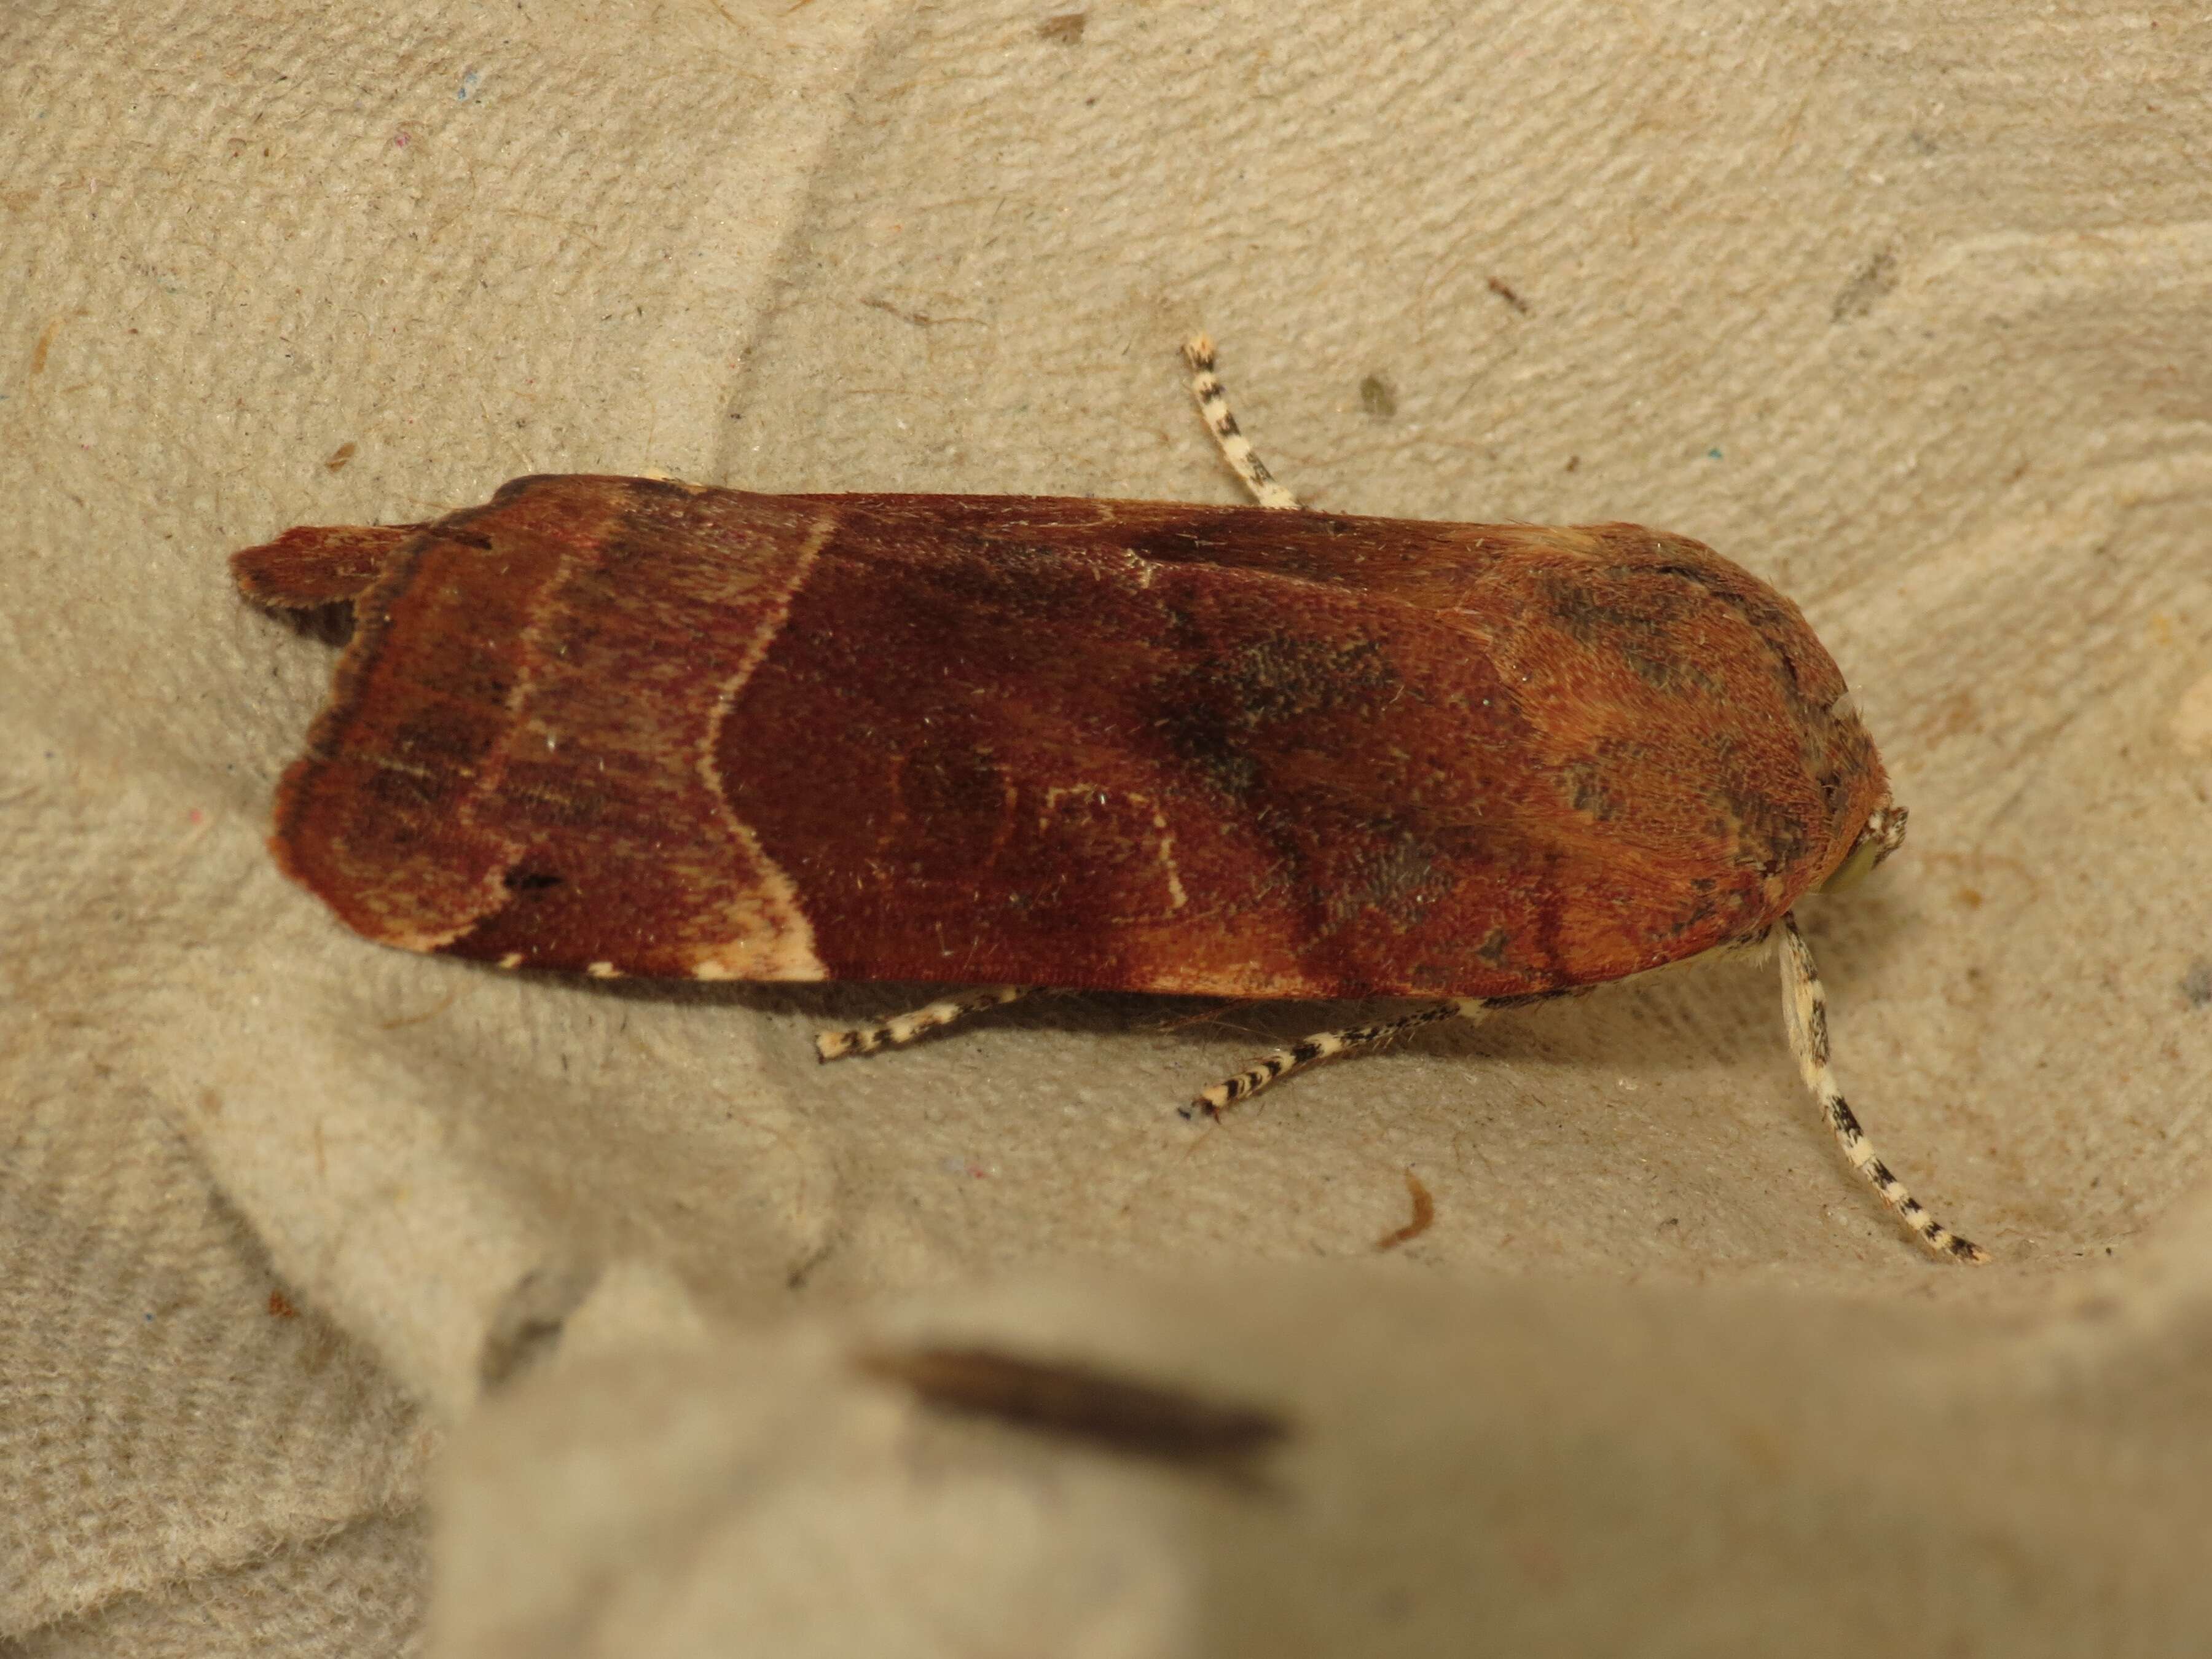 Image of broad-bordered yellow underwing